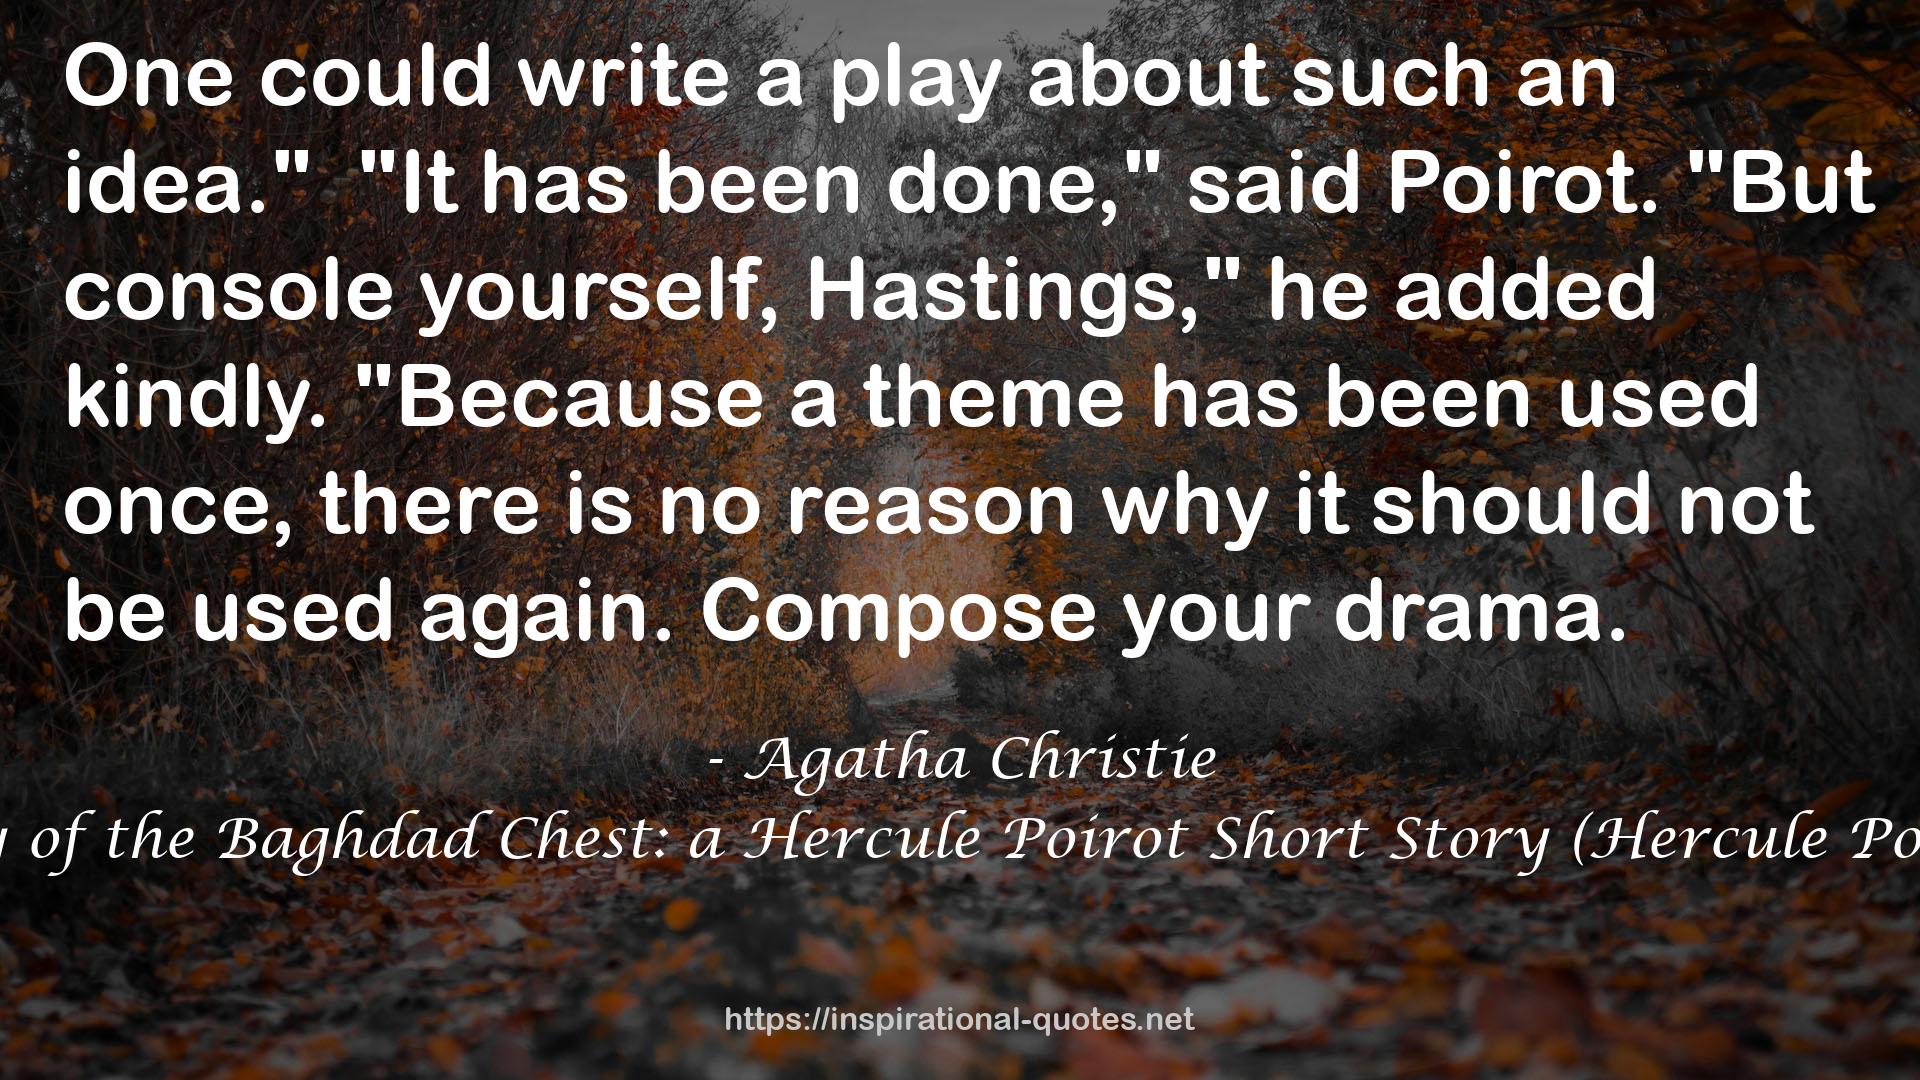 The Mystery of the Baghdad Chest: a Hercule Poirot Short Story (Hercule Poirot, #EX-03) QUOTES